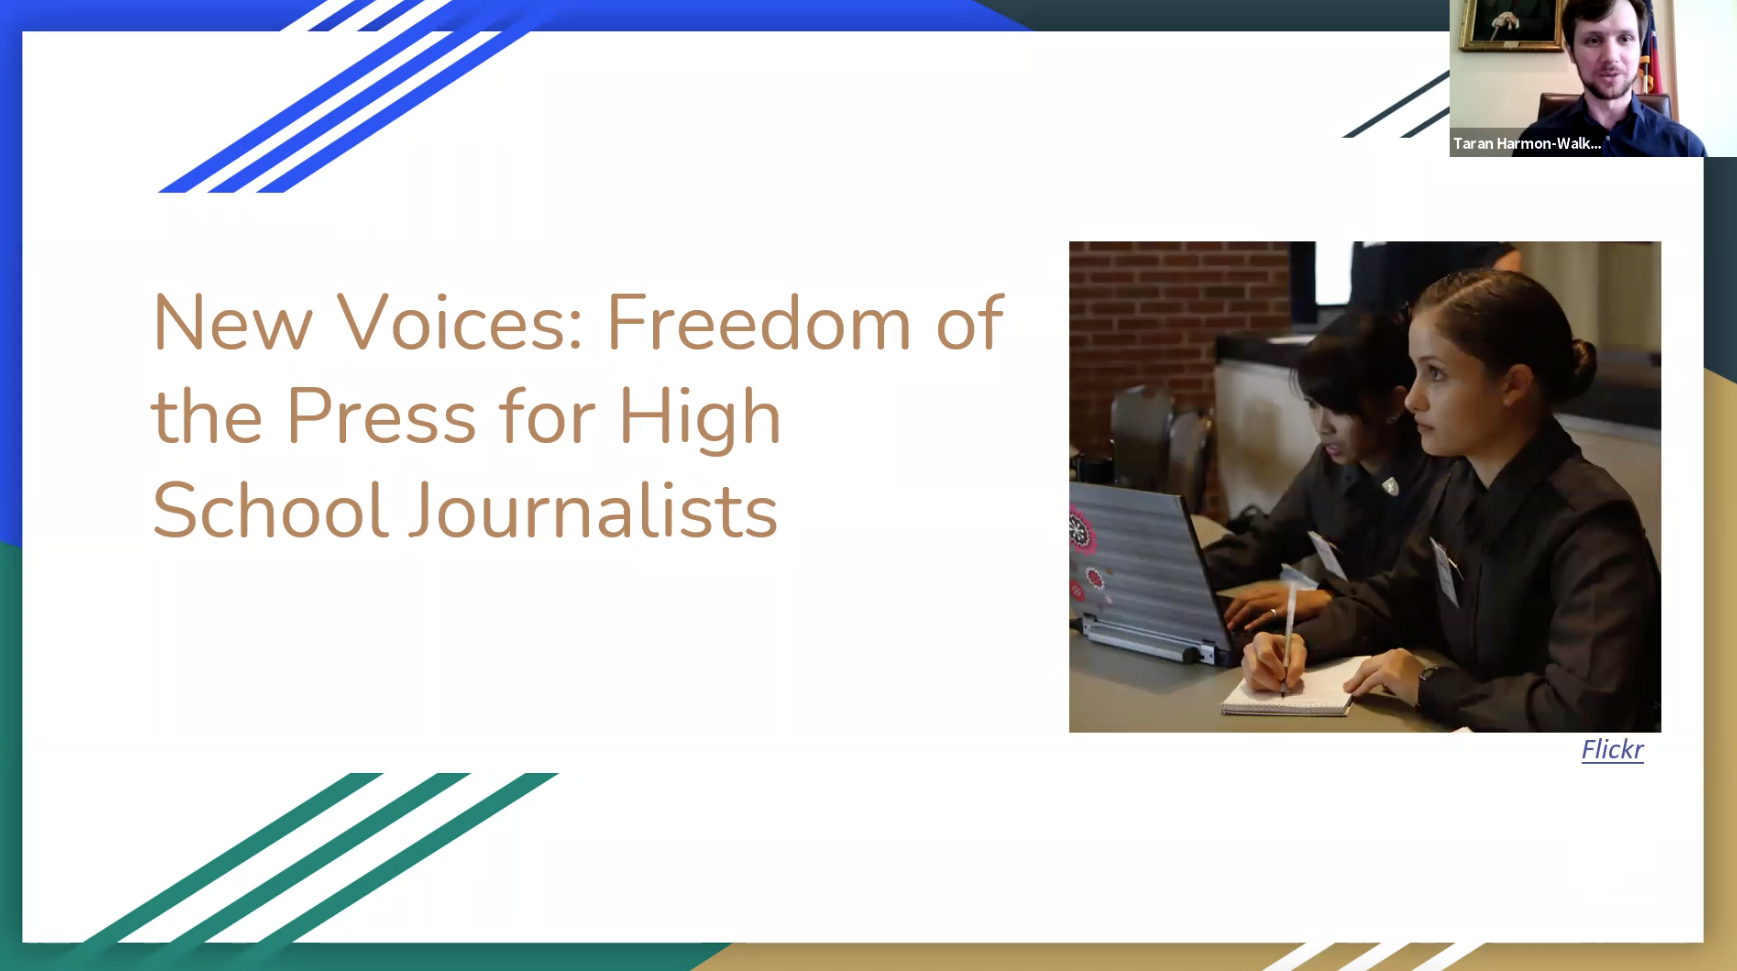 New Voices: Freedom of the Press for High School Journalists